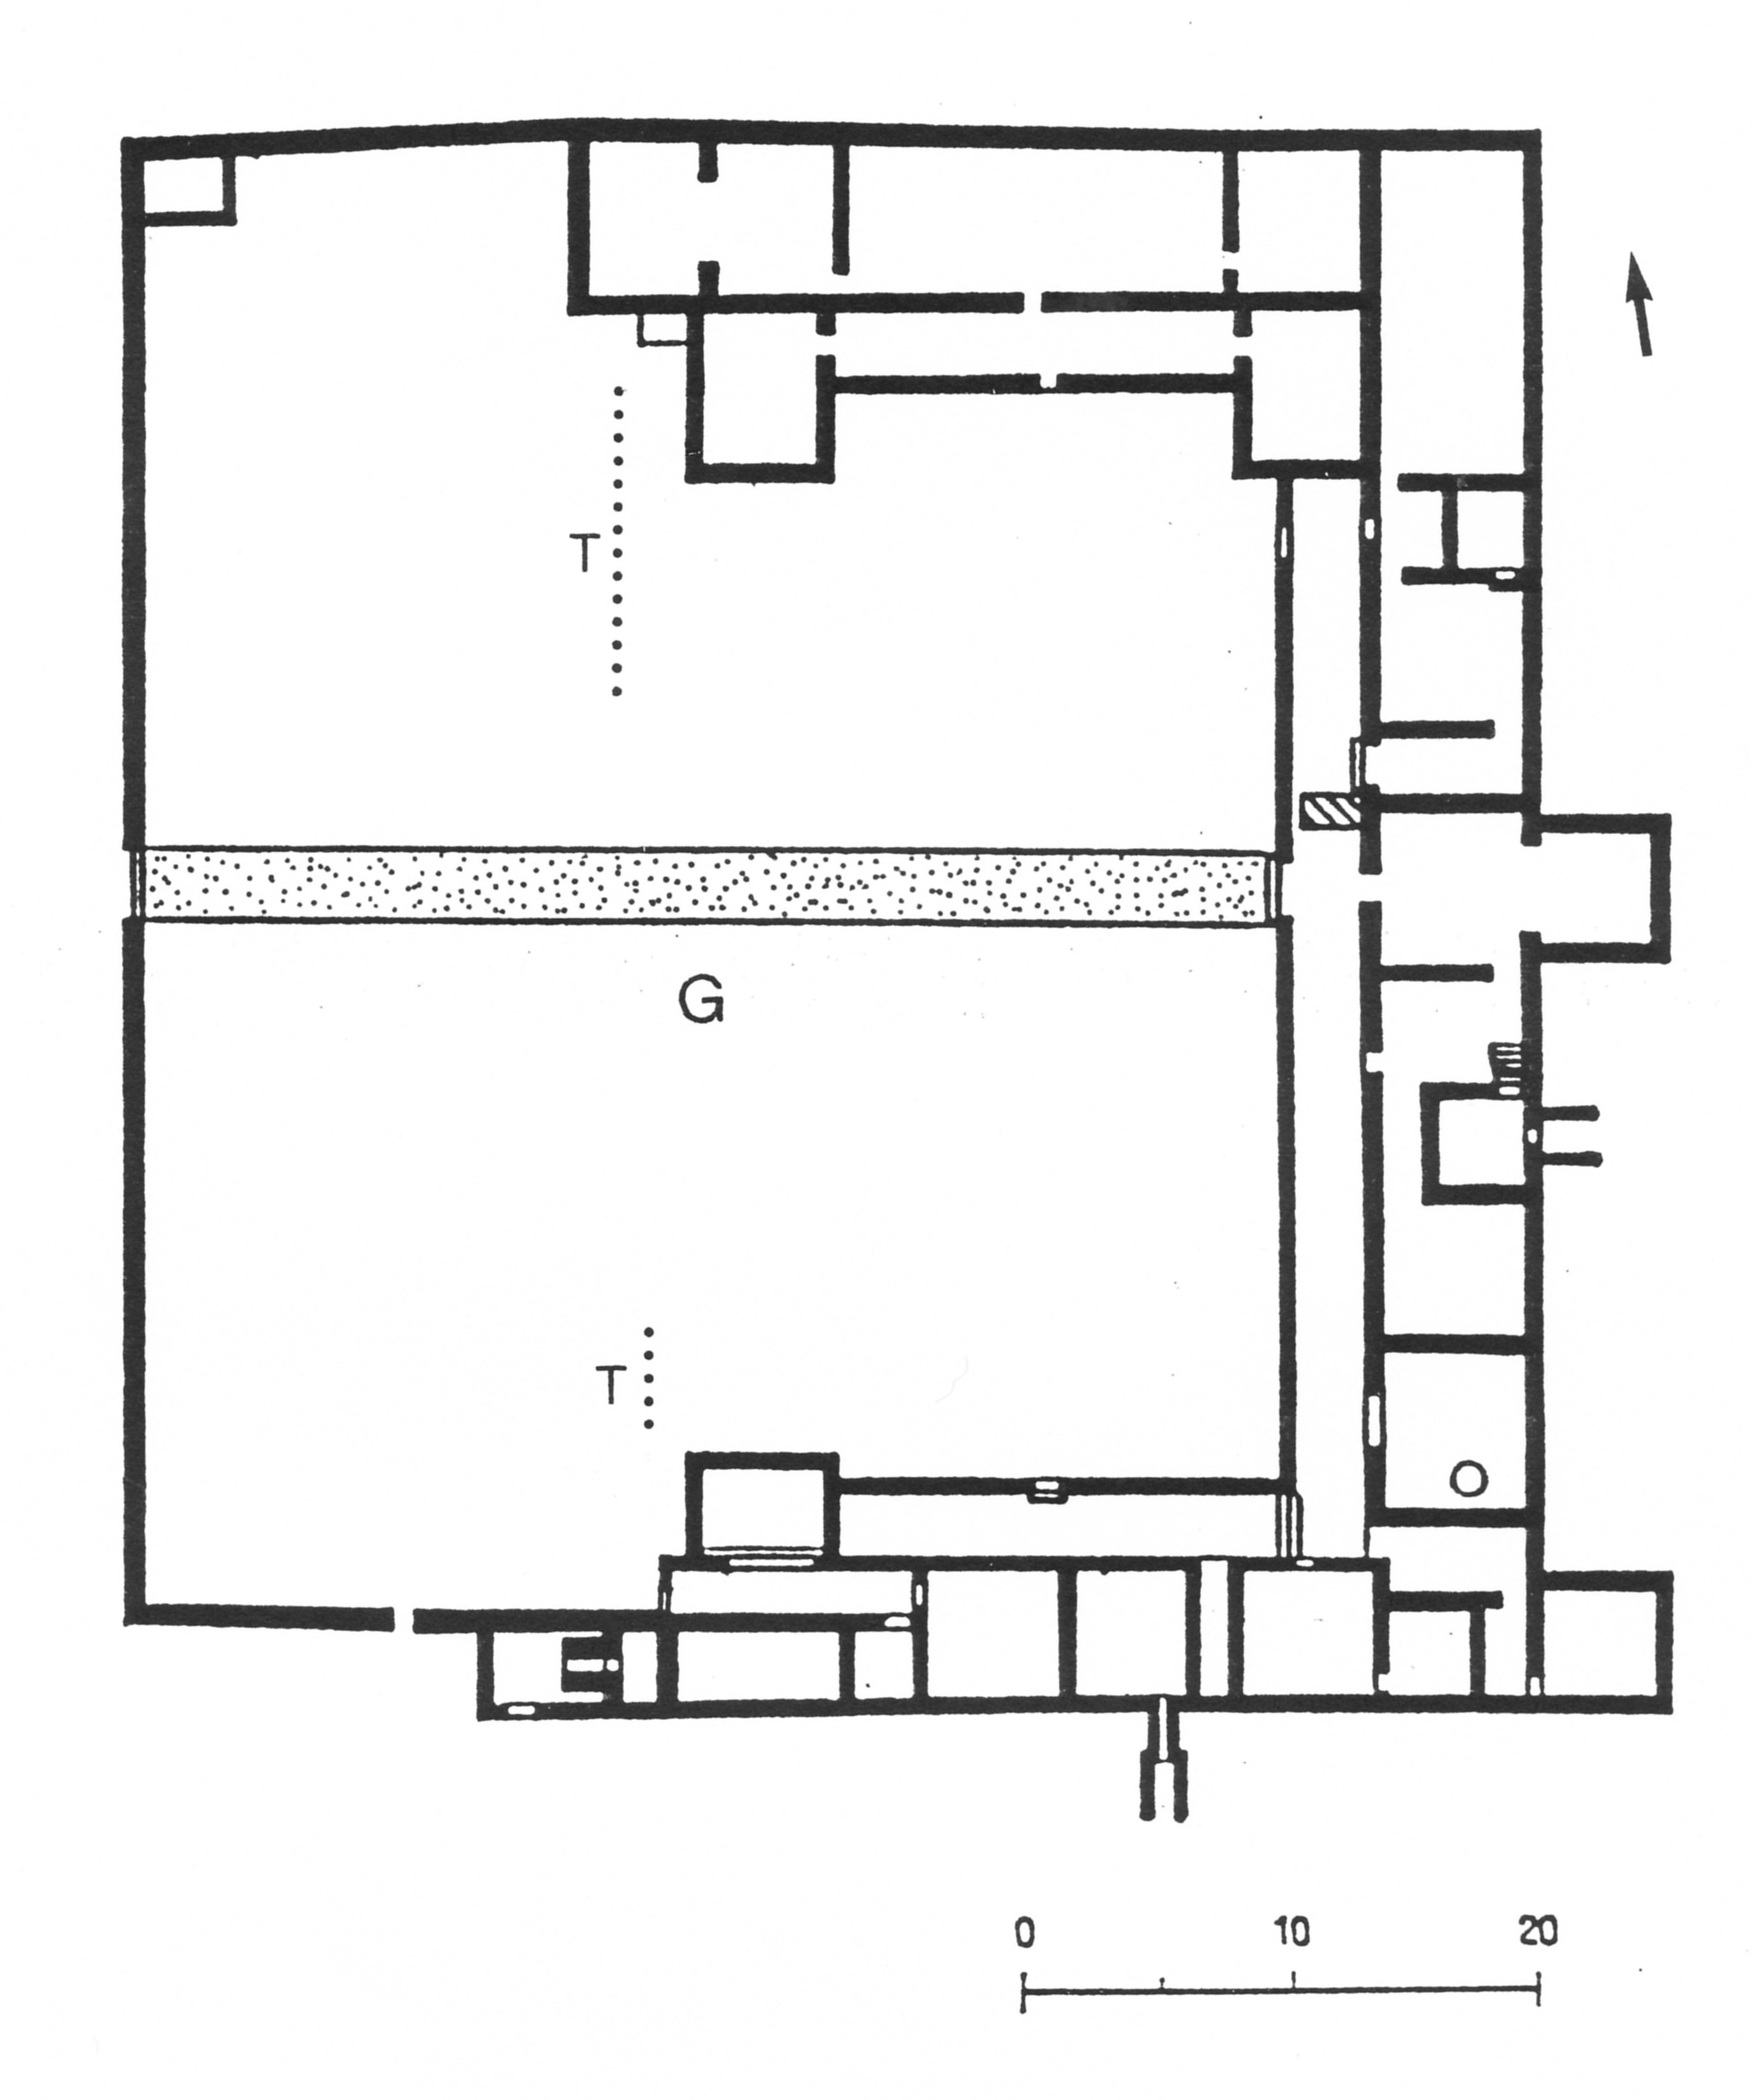 Fig. 1: Plan of the villa with a path (stippled) leading through a courtyard garden (G) and garden